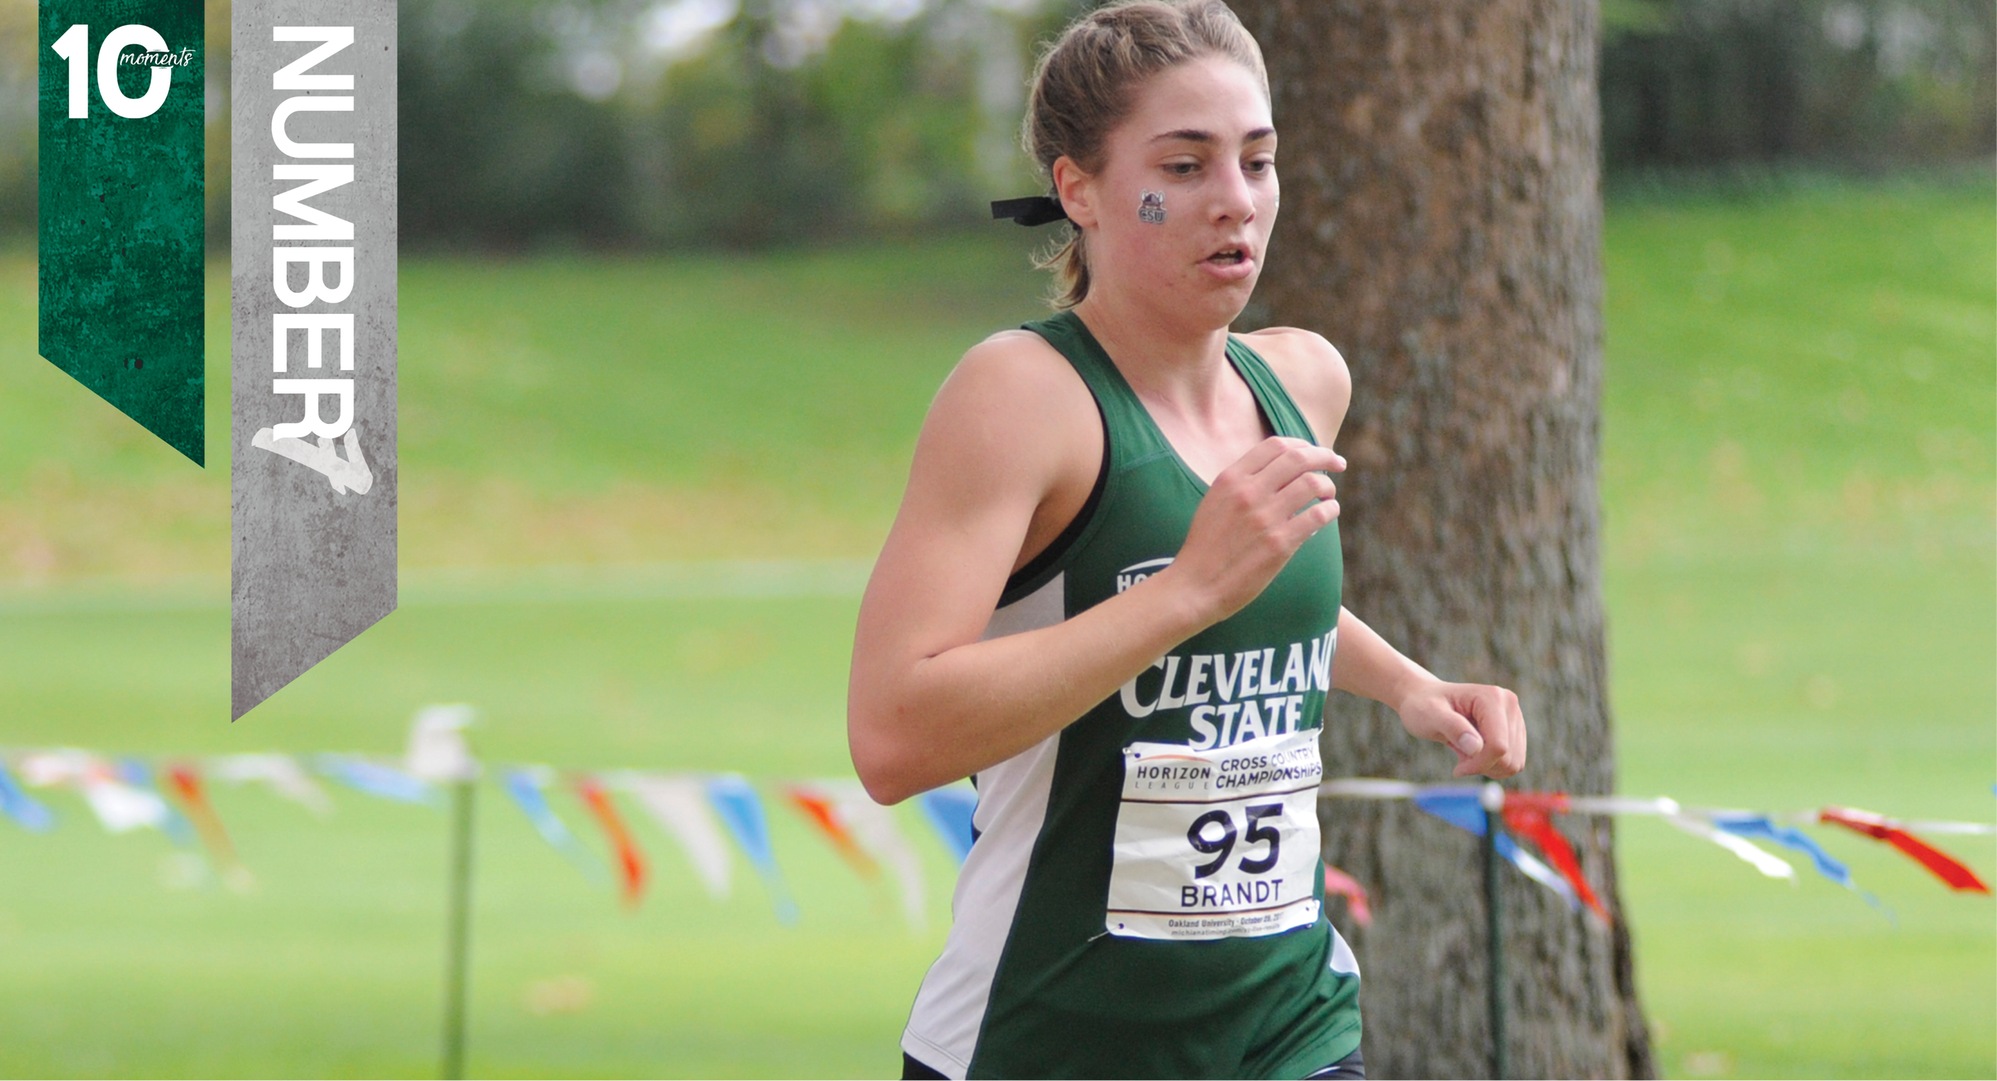 2017-18 CSU Athletics Top 10 Moments | #7 - Anna Brandt Leads Cross Country at Horizon League Championship